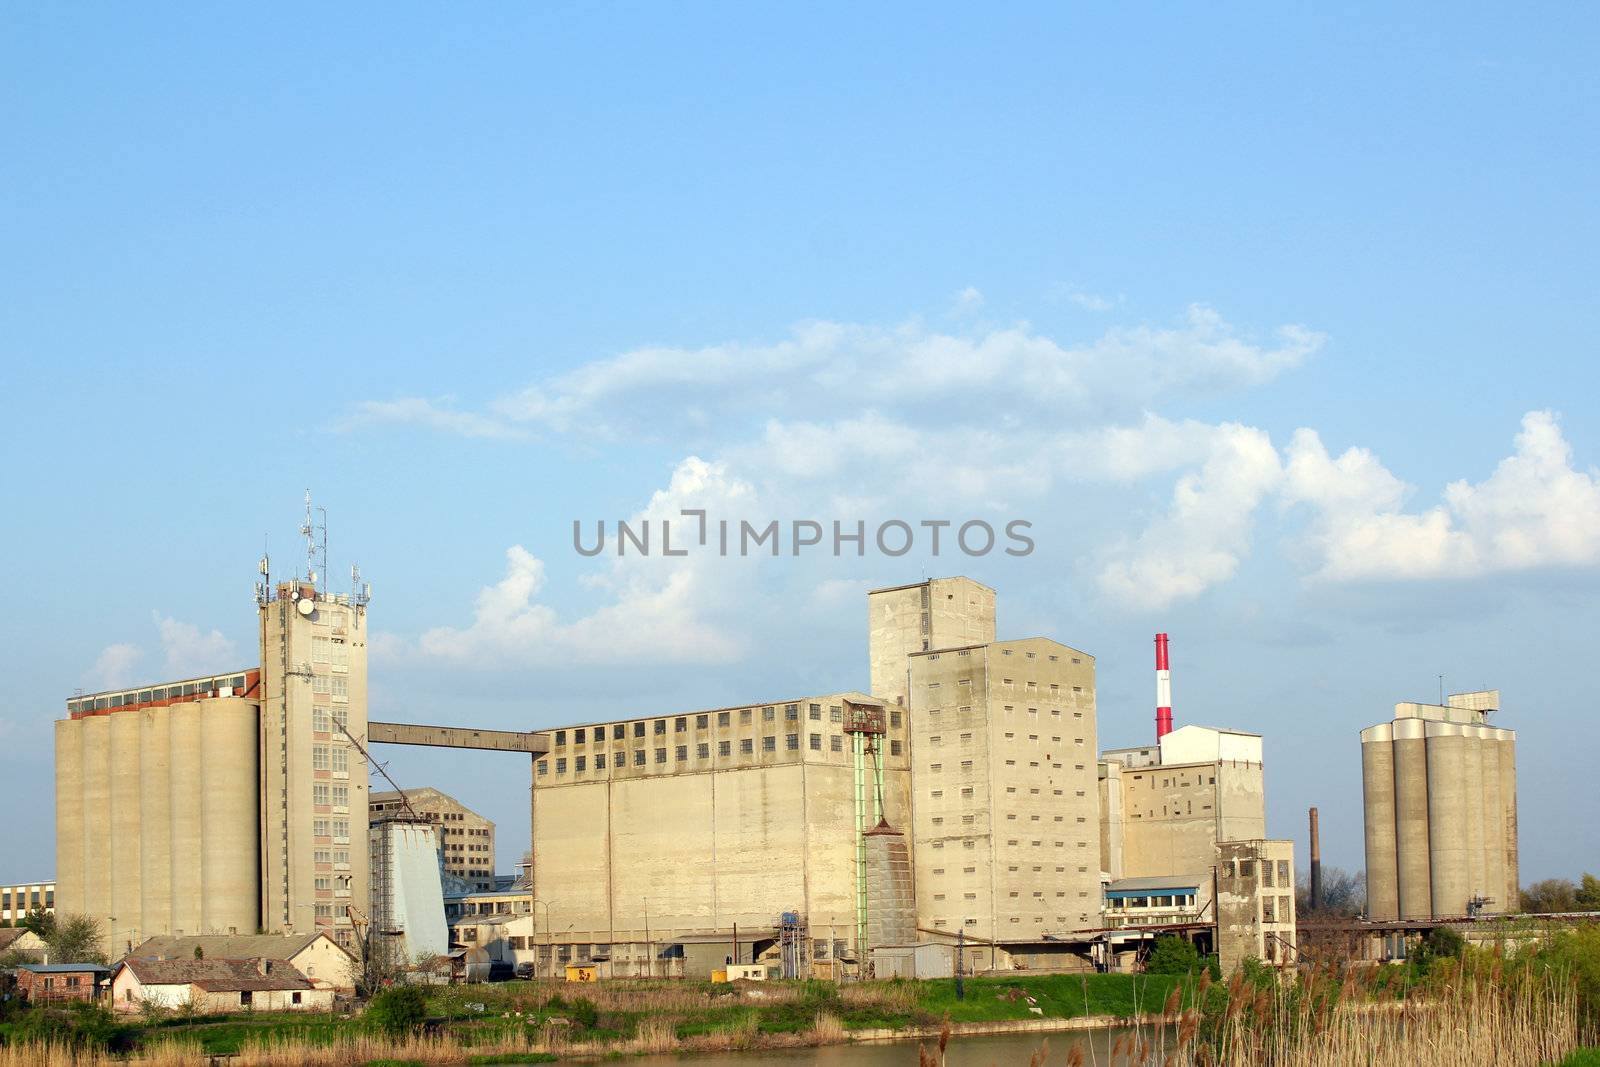 industry zone with silo and warehouse